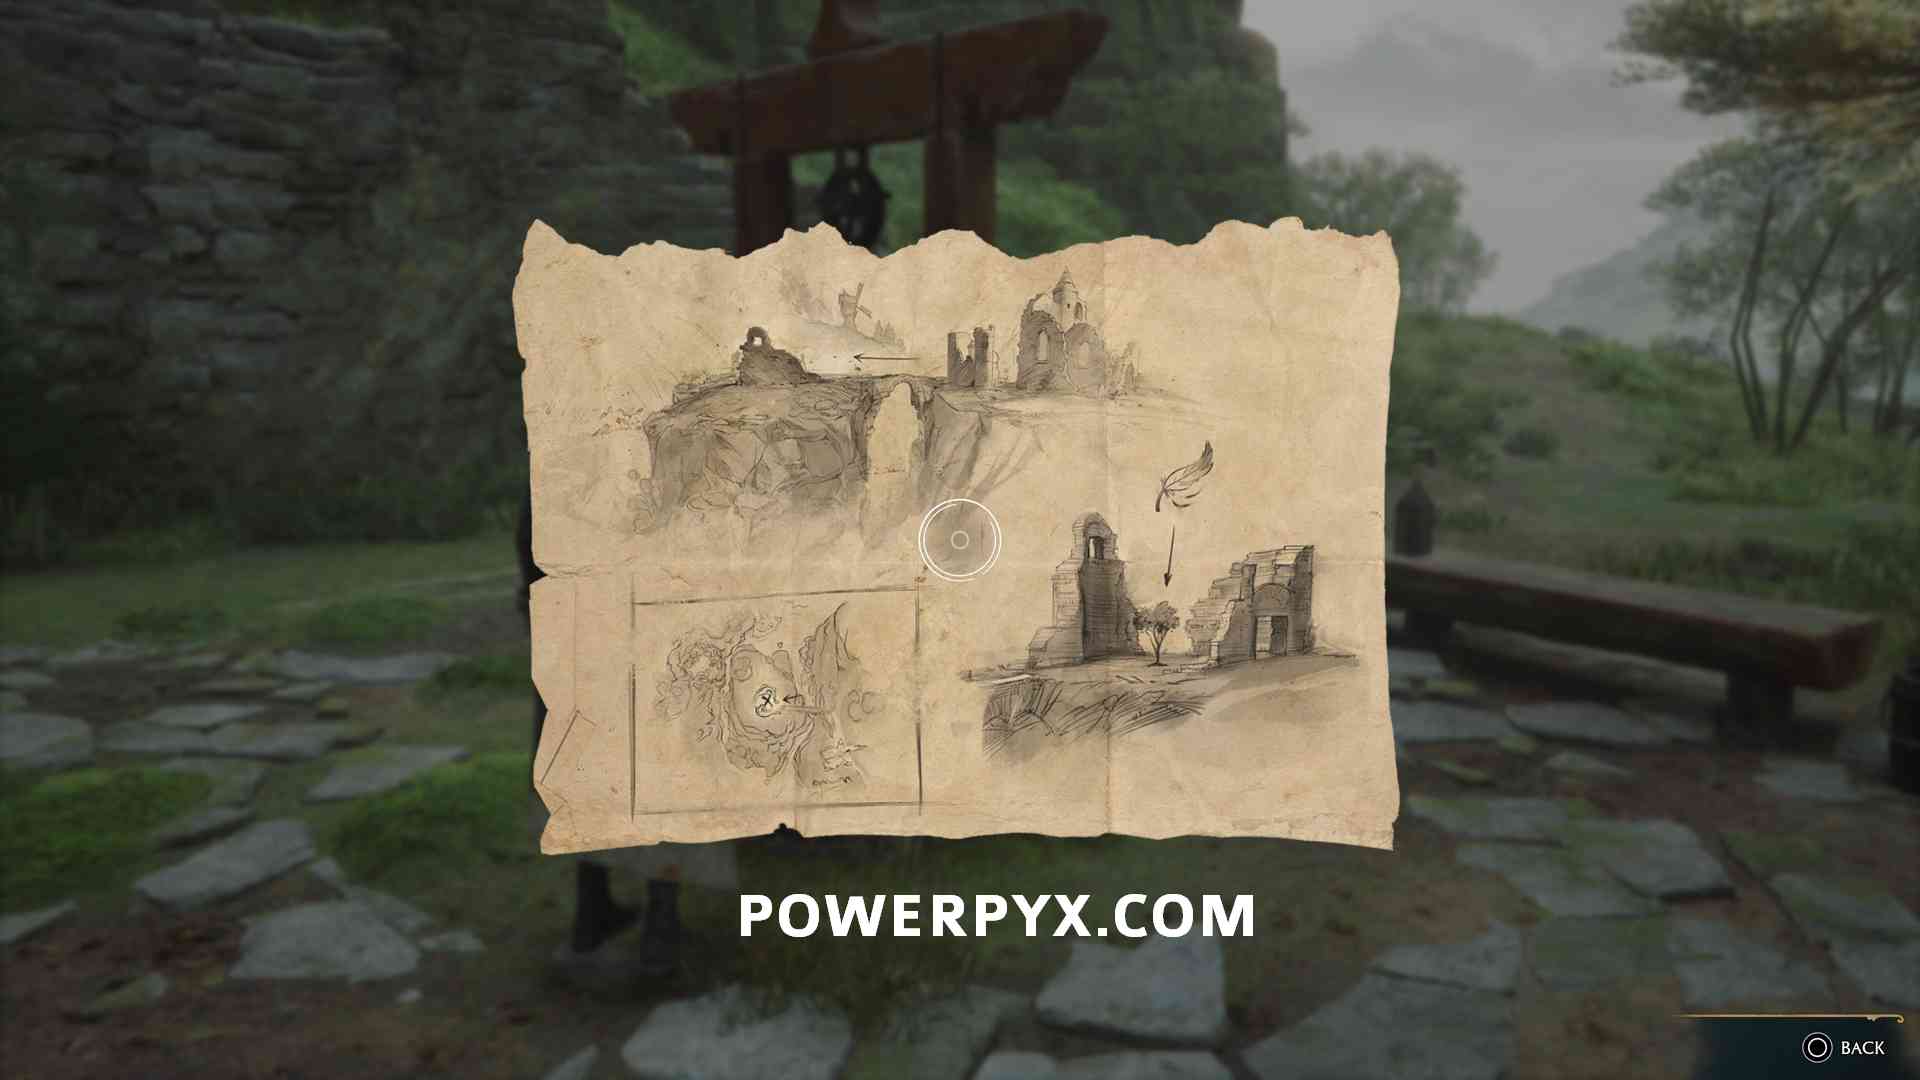 Hogwarts Legacy Well's Treasure Map Solution